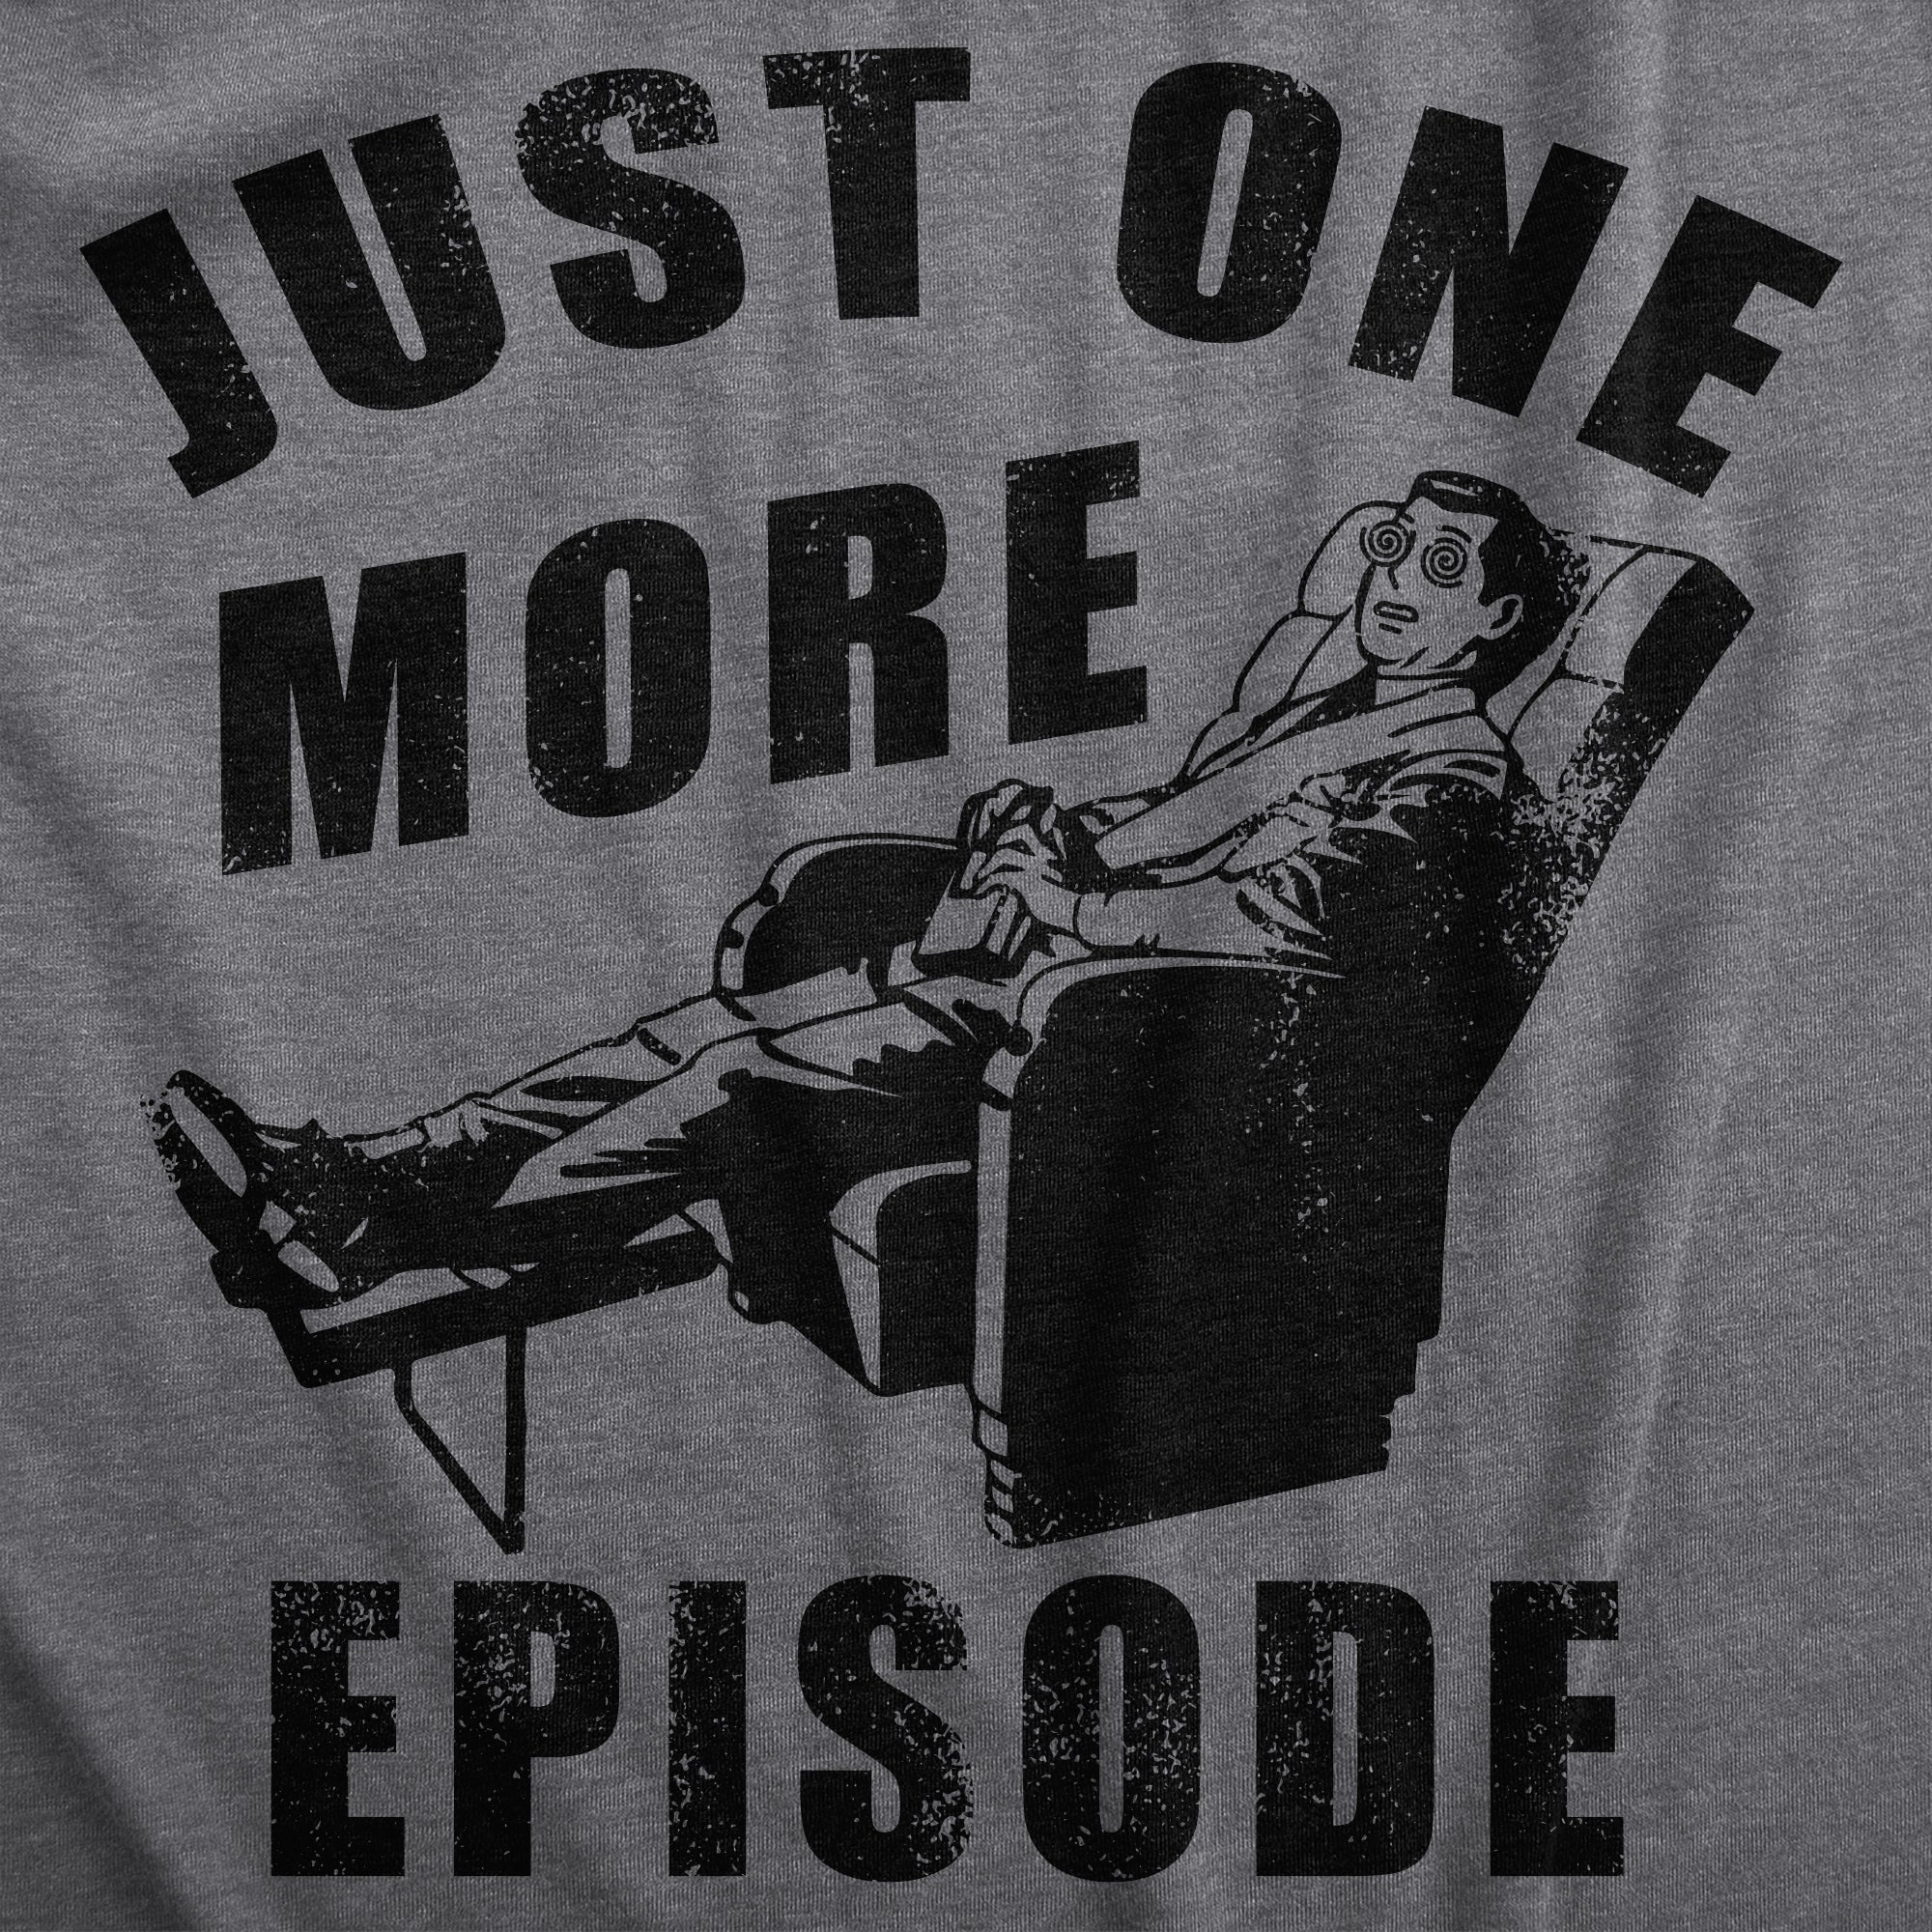 Funny Dark Heather Grey - EPISODE Just One More Episode Mens T Shirt Nerdy TV & Movies sarcastic Tee